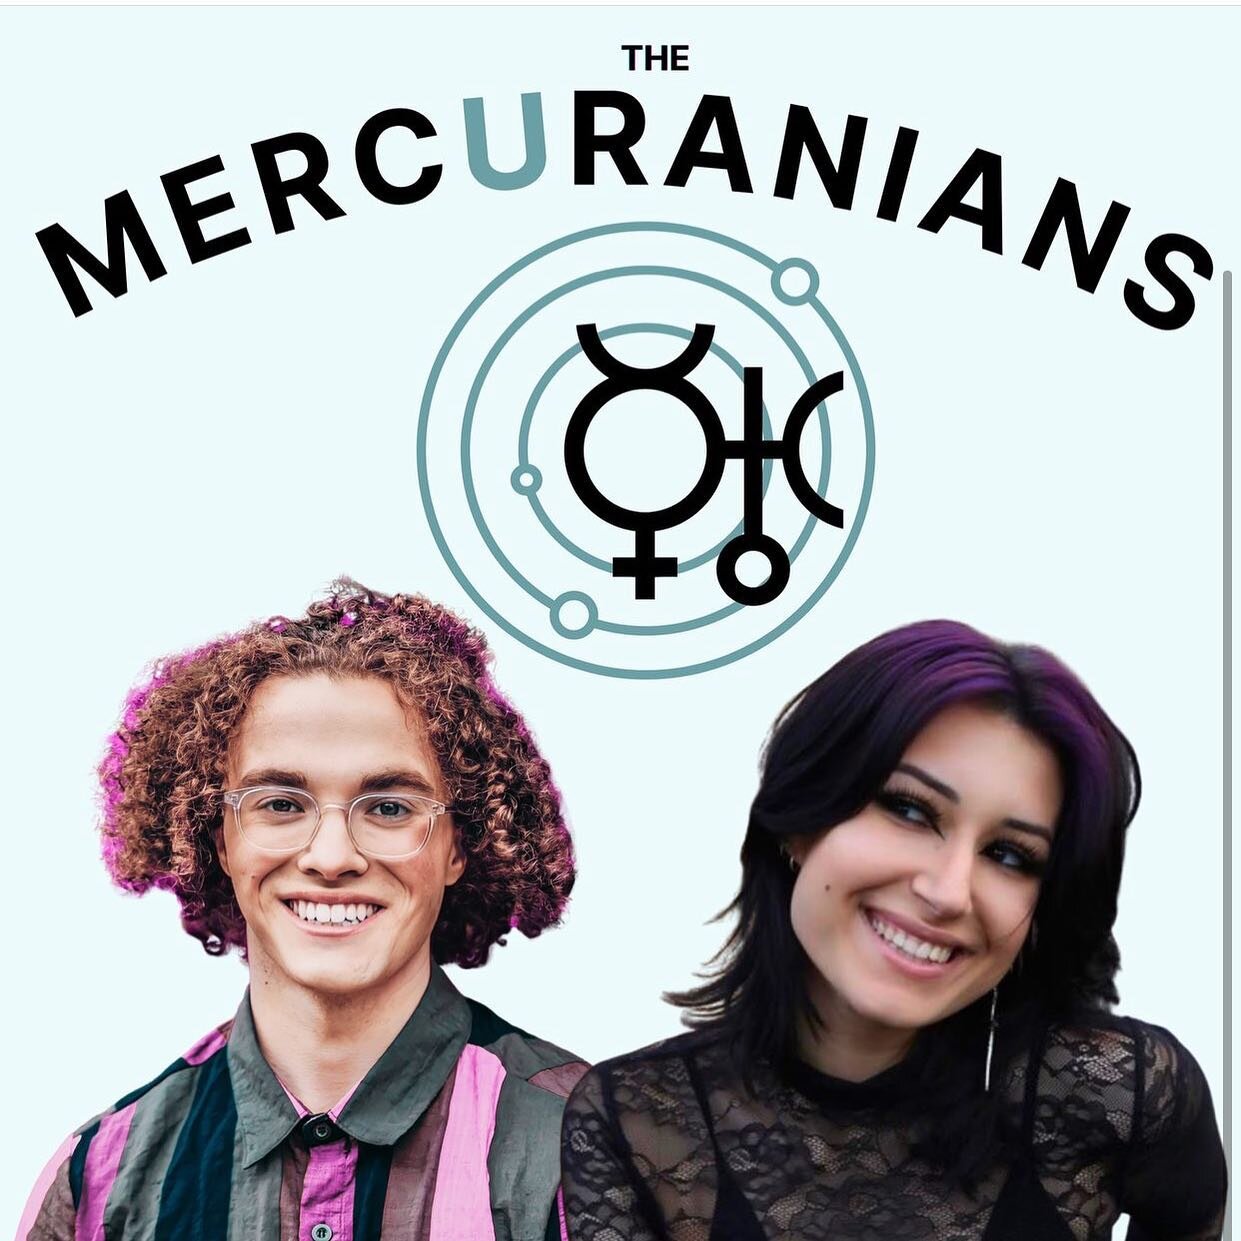 And we're live! Check out our new podcast on Spotify and YouTube @themercuranians! We're going to be talking astro, transits, how to read your chart, understand the planets, signs and so much more. Our goal is to make accessible discussions on exciti